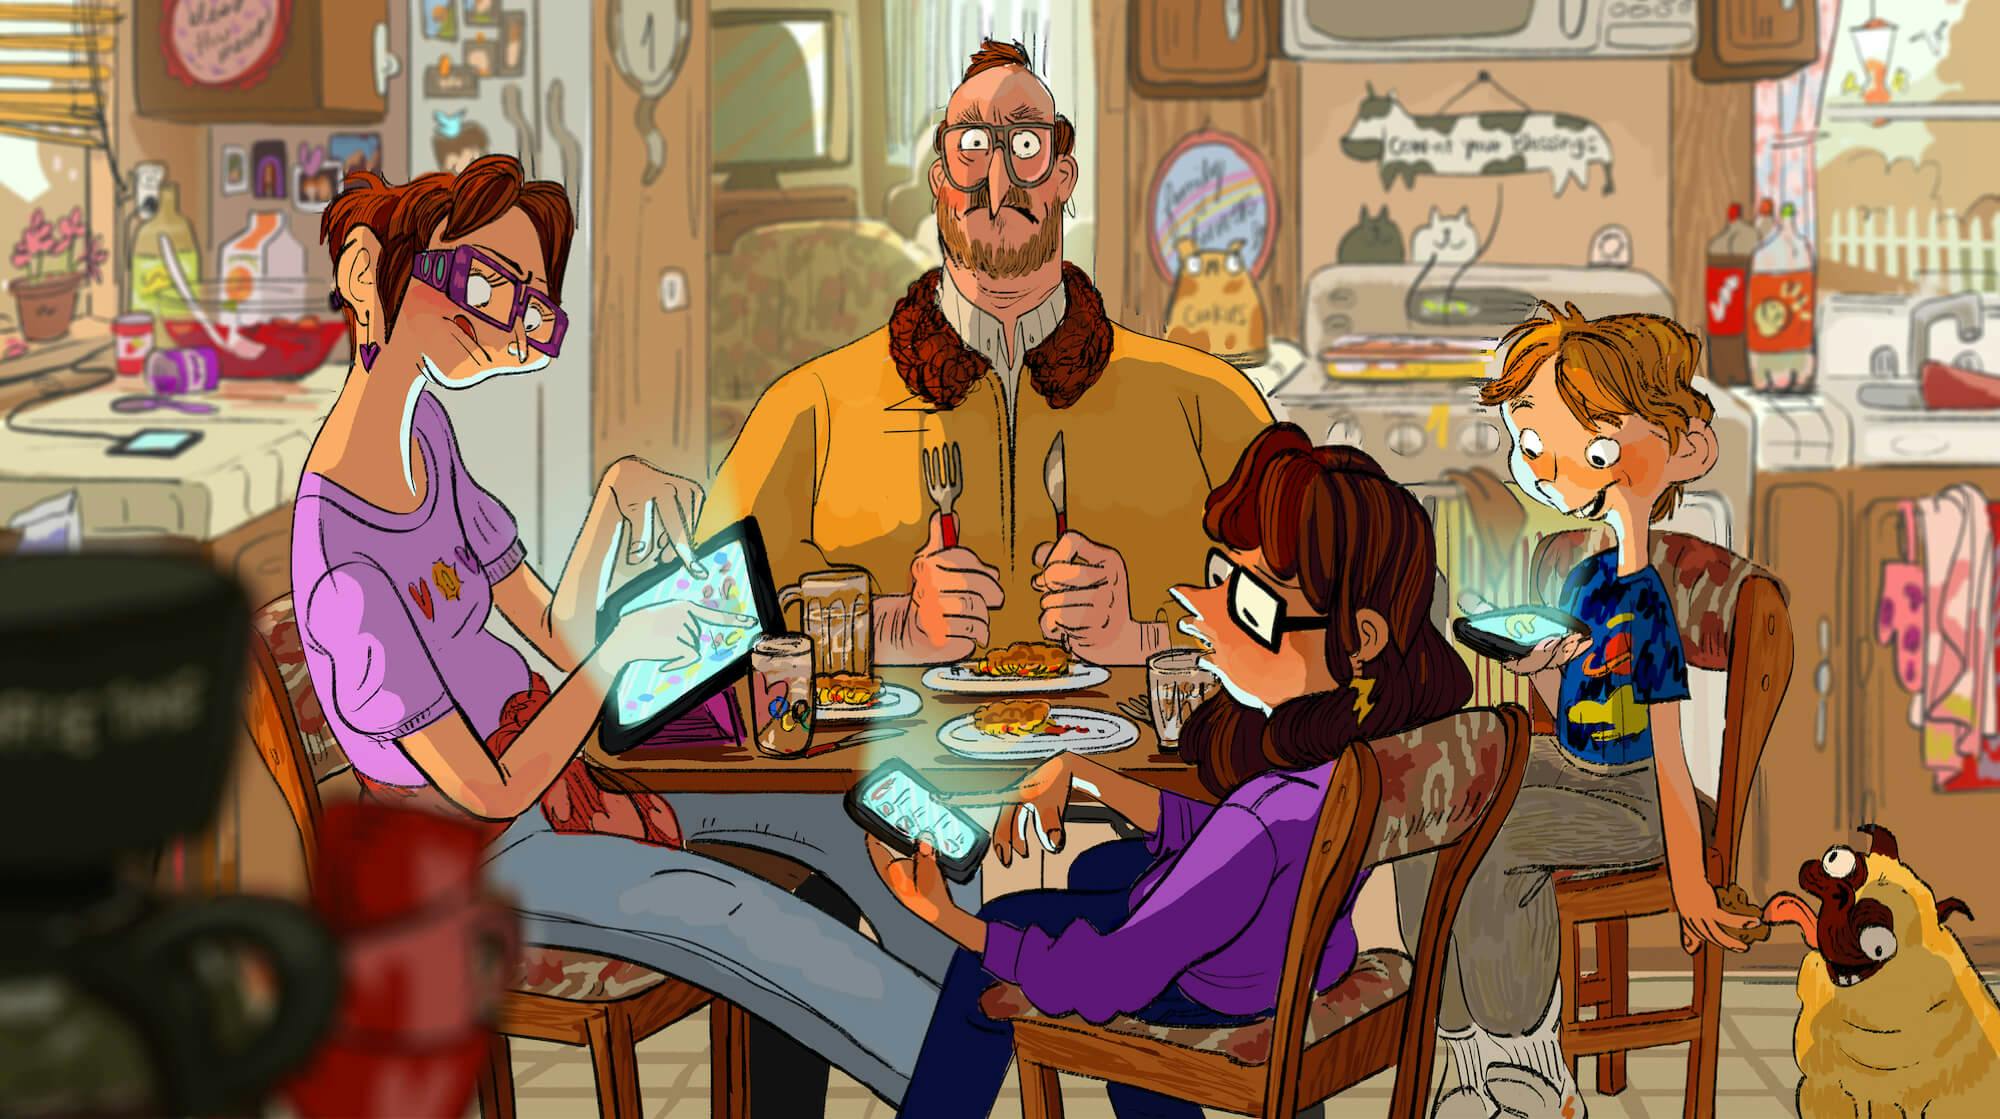 The Mitchells sit at the kitchen table. Linda looks on her iPad, Katie scrolls on her phone, and Aaron smiles in glee at something on his phone as Monchi licks his finger. Only Rick is screen-less holding his knife and fork at the ready over his meal. Behind them the kitchen is cluttered with soda litre bottles, bowls, and dishtowels.